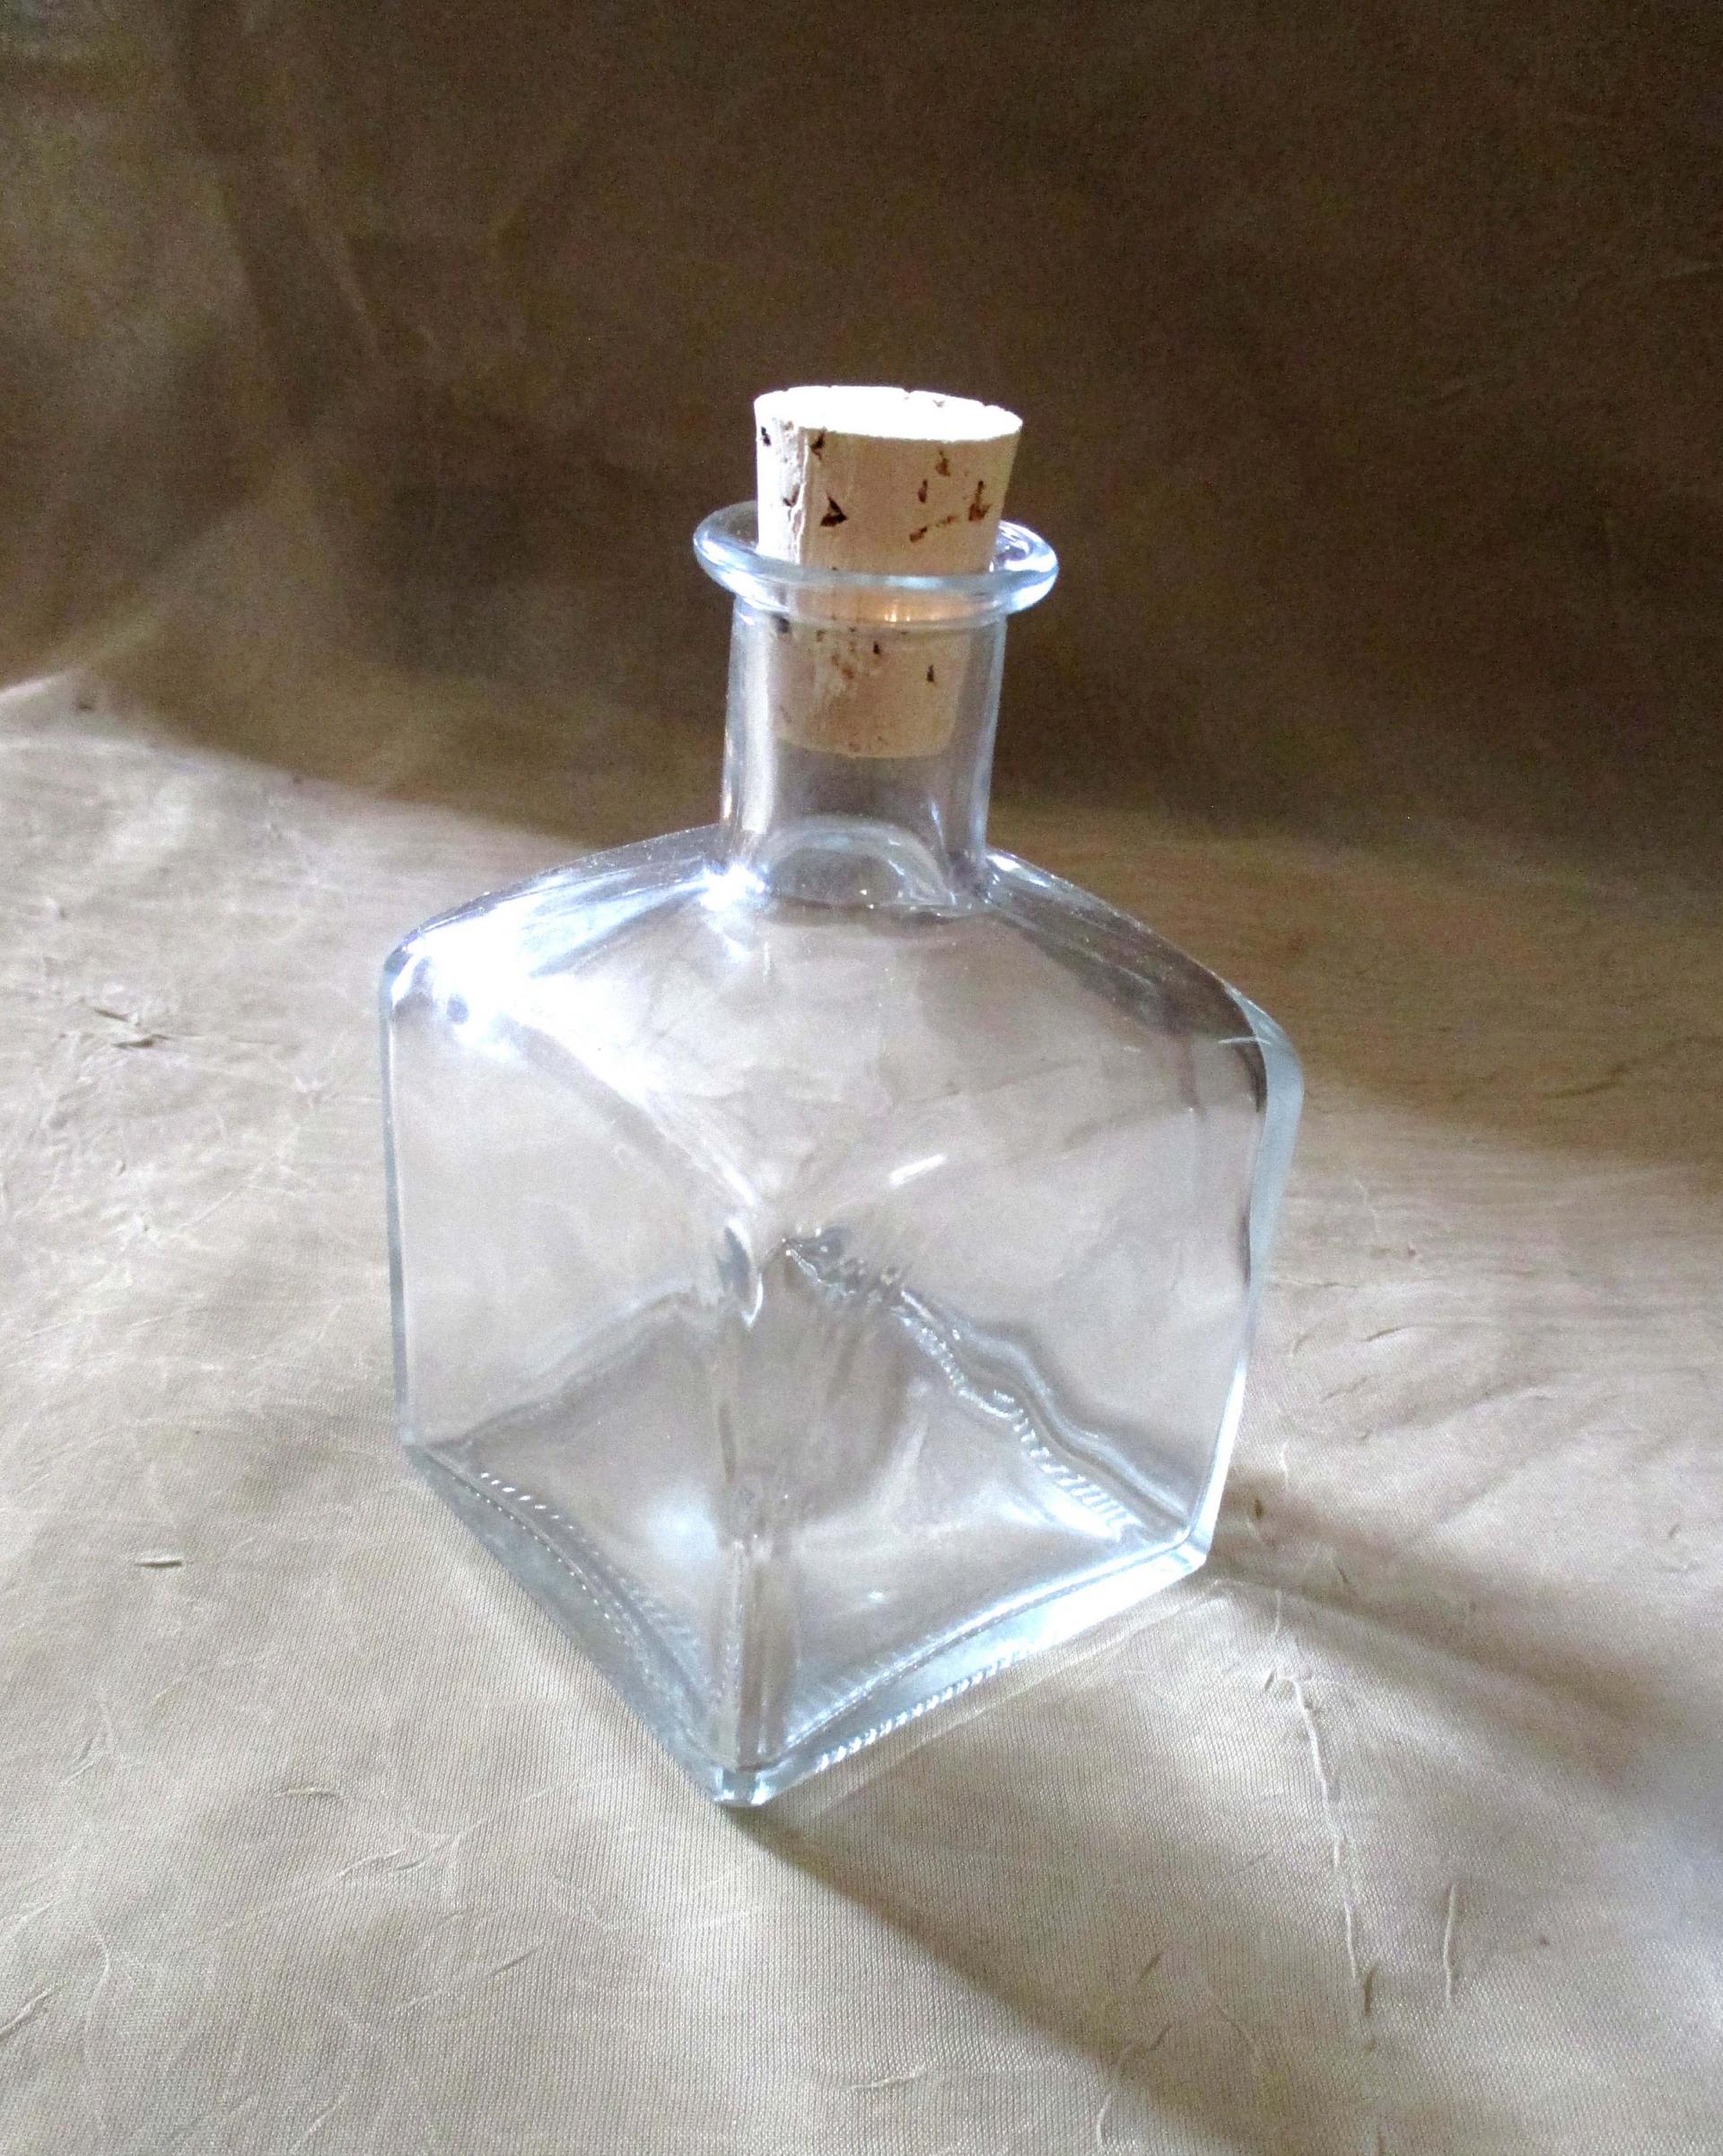 Apothecary Bottles, Large Bottles with Cork